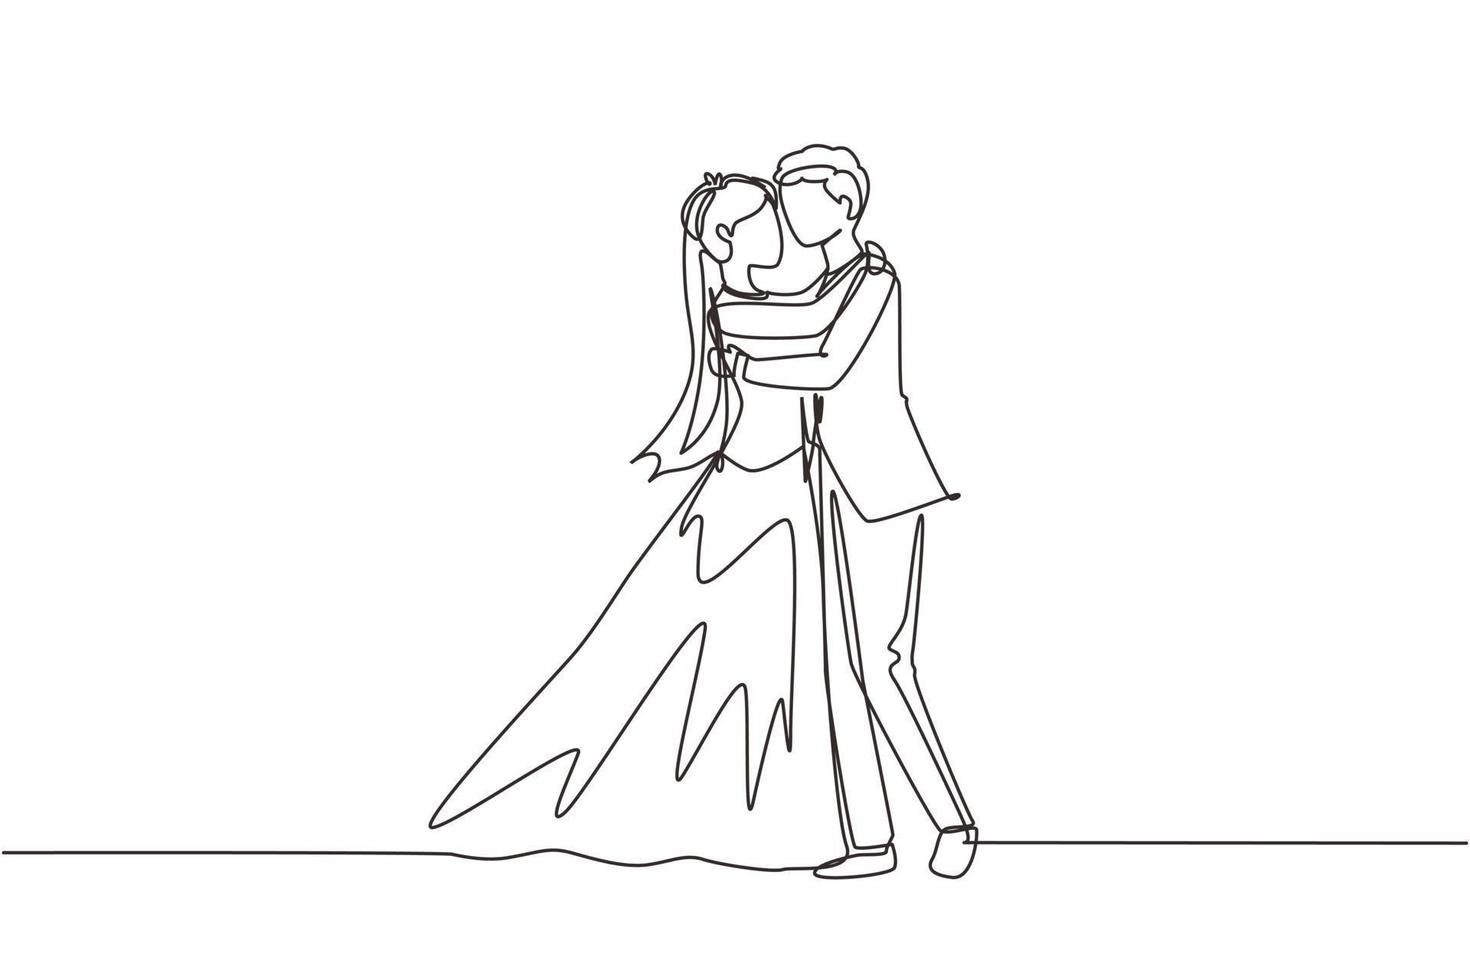 Single continuous line cute married couple in romantic pose. Happy man hugging his partner woman with wedding dress. Intimacy celebrates wedding party. One line draw graphic design vector illustration